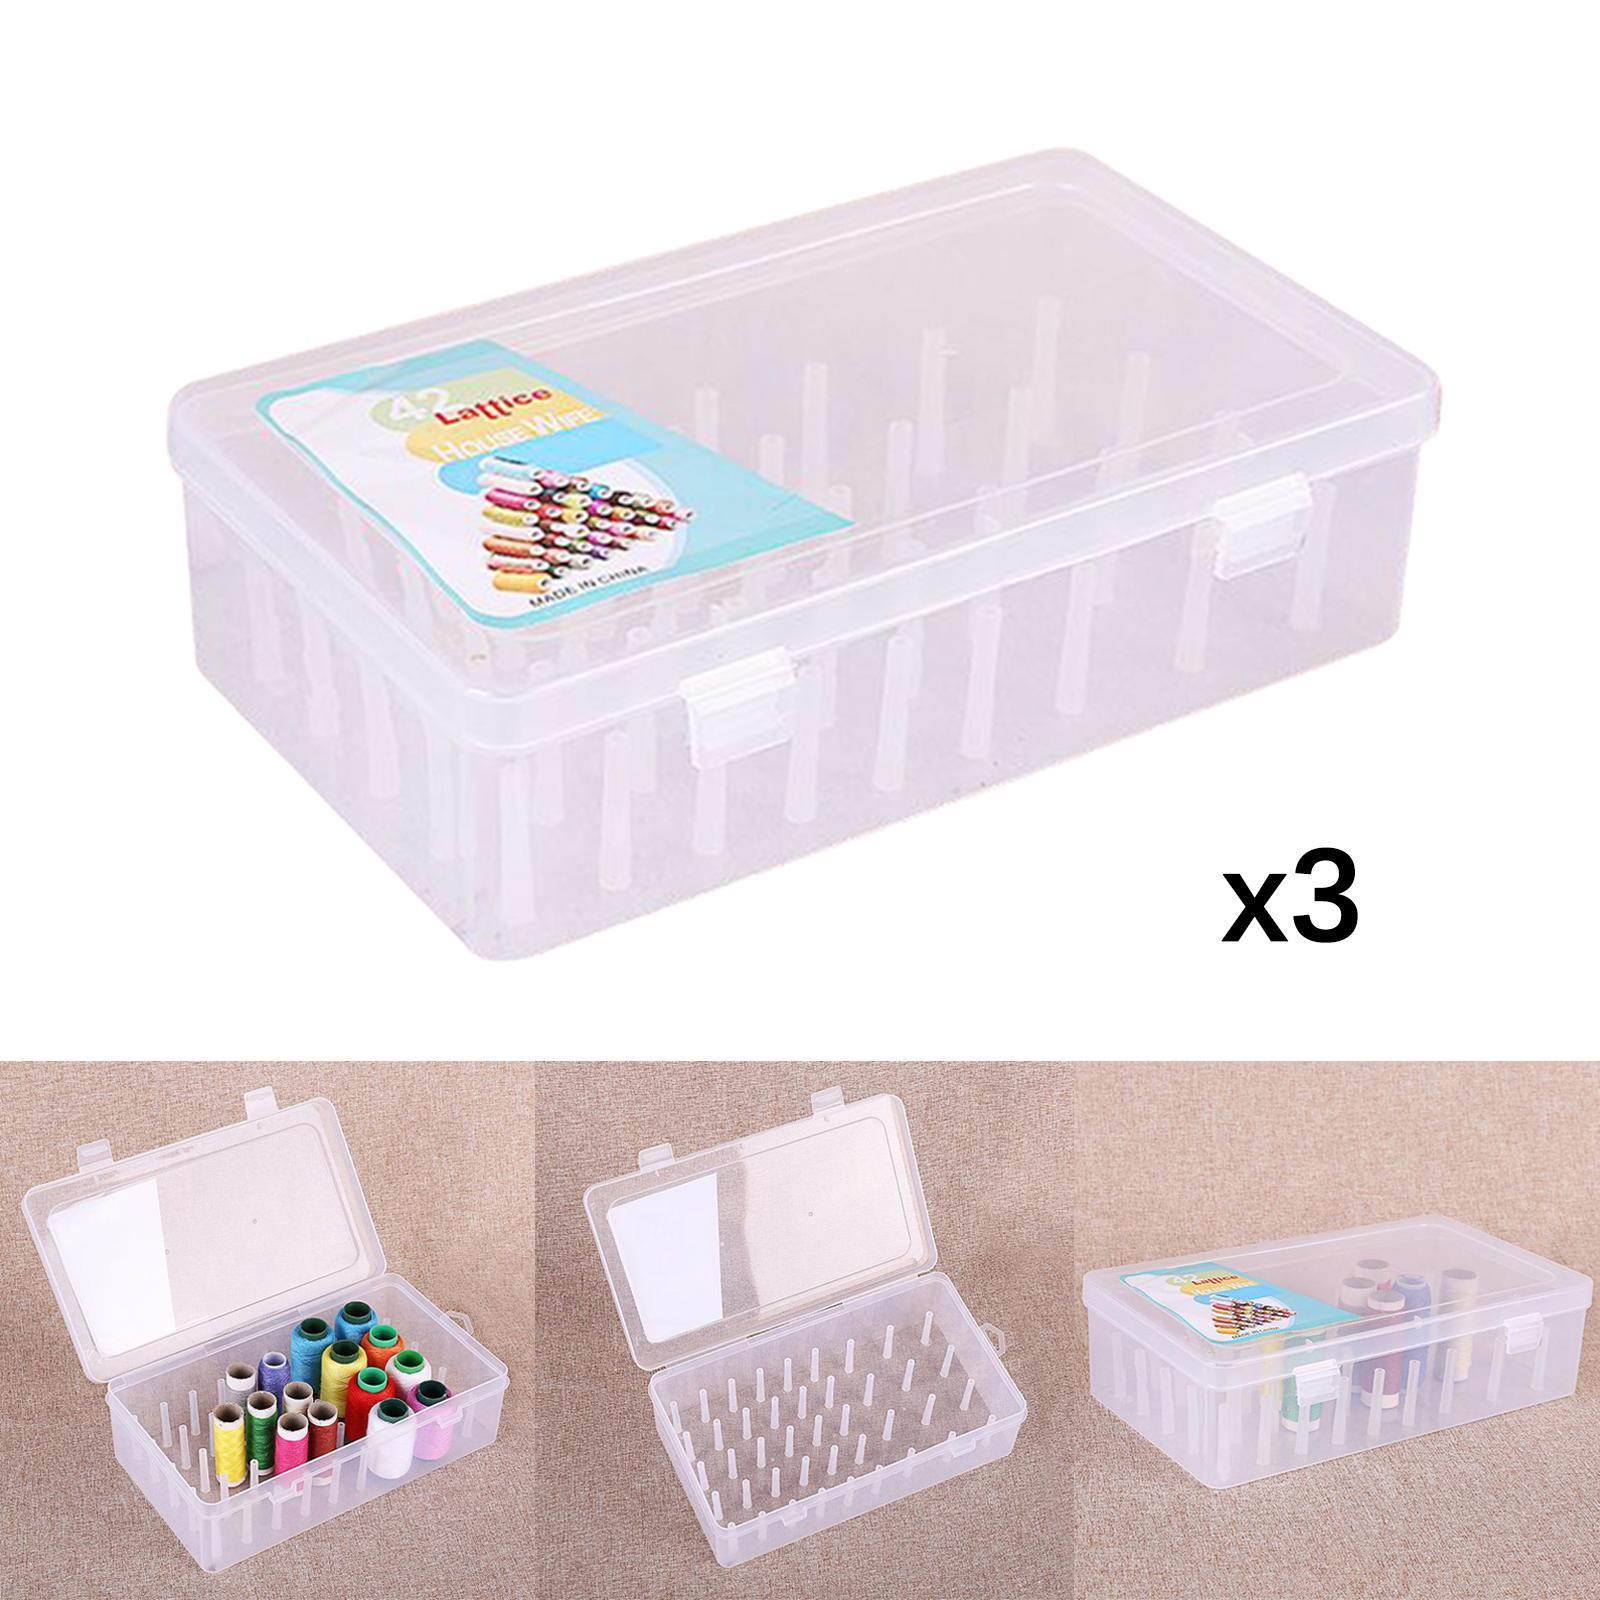 3 Pieces Sewing Thread Holders for Spools of Thread, Portable Empty Case  Holder Box Container 42 Spools Pole Sew Threads Storage